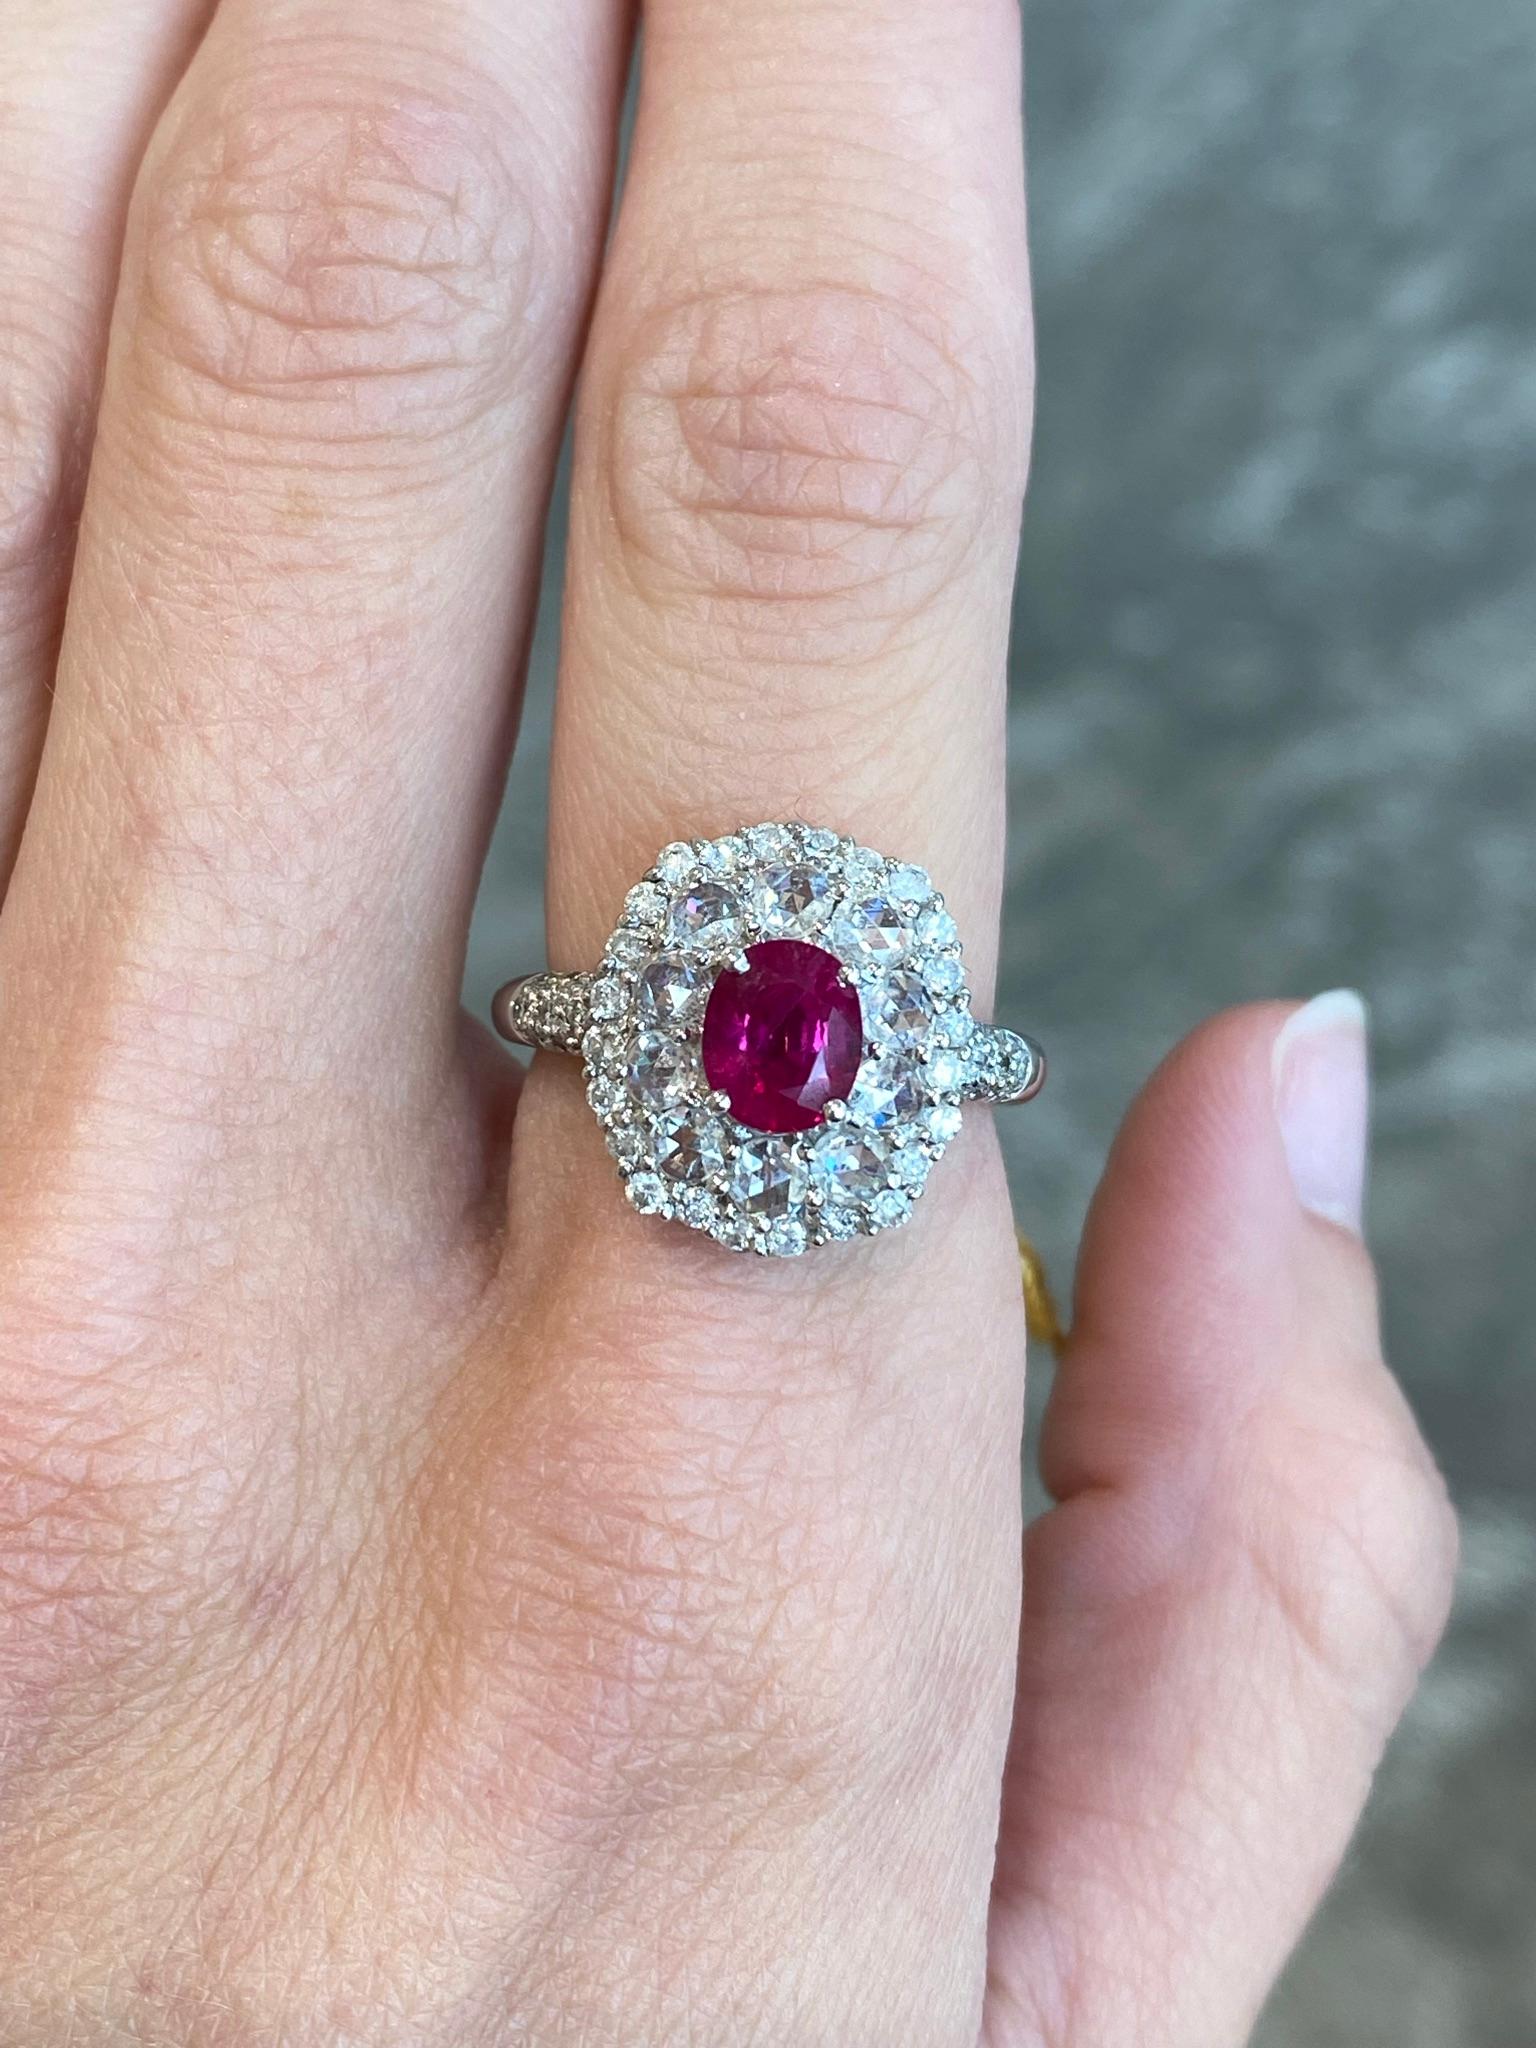 Victorian Elegant 1.21 Carat Ruby and Diamond Ring in 18KT White Gold For Sale